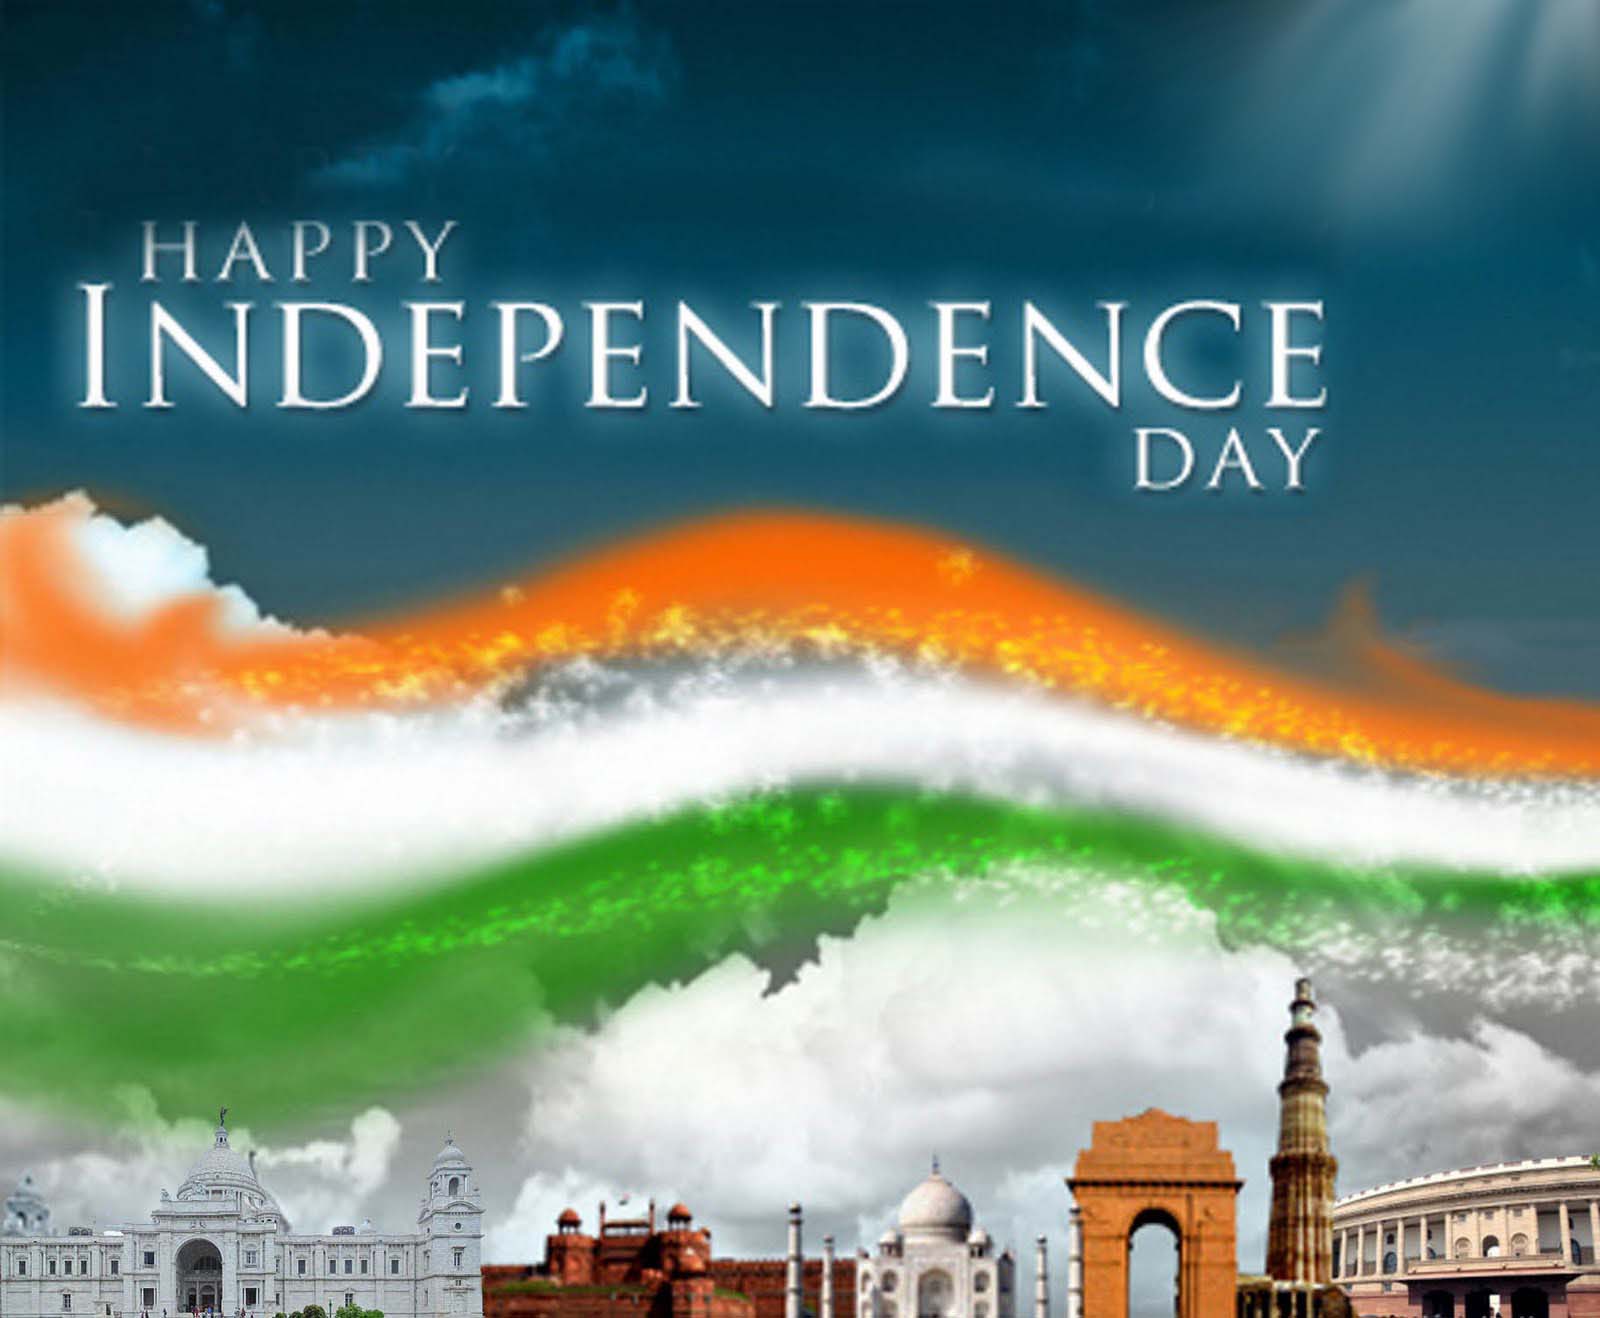 Independence Day Greetings And Hd Wallpapers - 15 August Greeting Cards - HD Wallpaper 